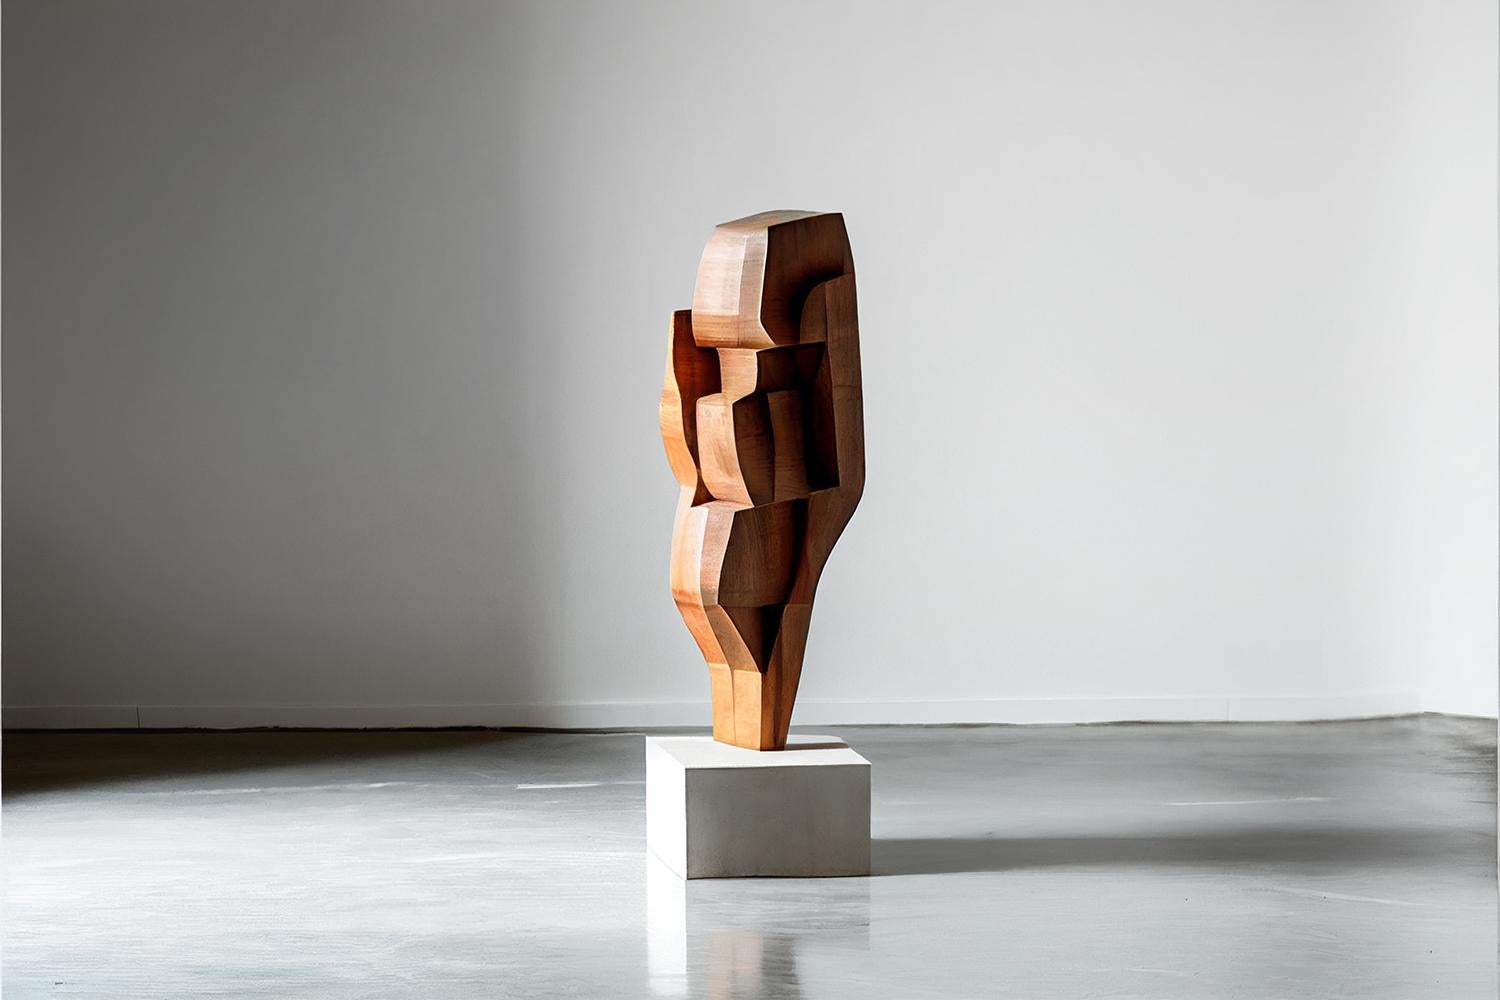 Abstract wood sculpture in the flair of Scandinavian Art, Unseen Force by Joel Escalona.

This monolithic sculpture, designed by the talented Artist Joel Escalona, is a towering example of beauty in craftsmanship. Hand and digital machine made; the